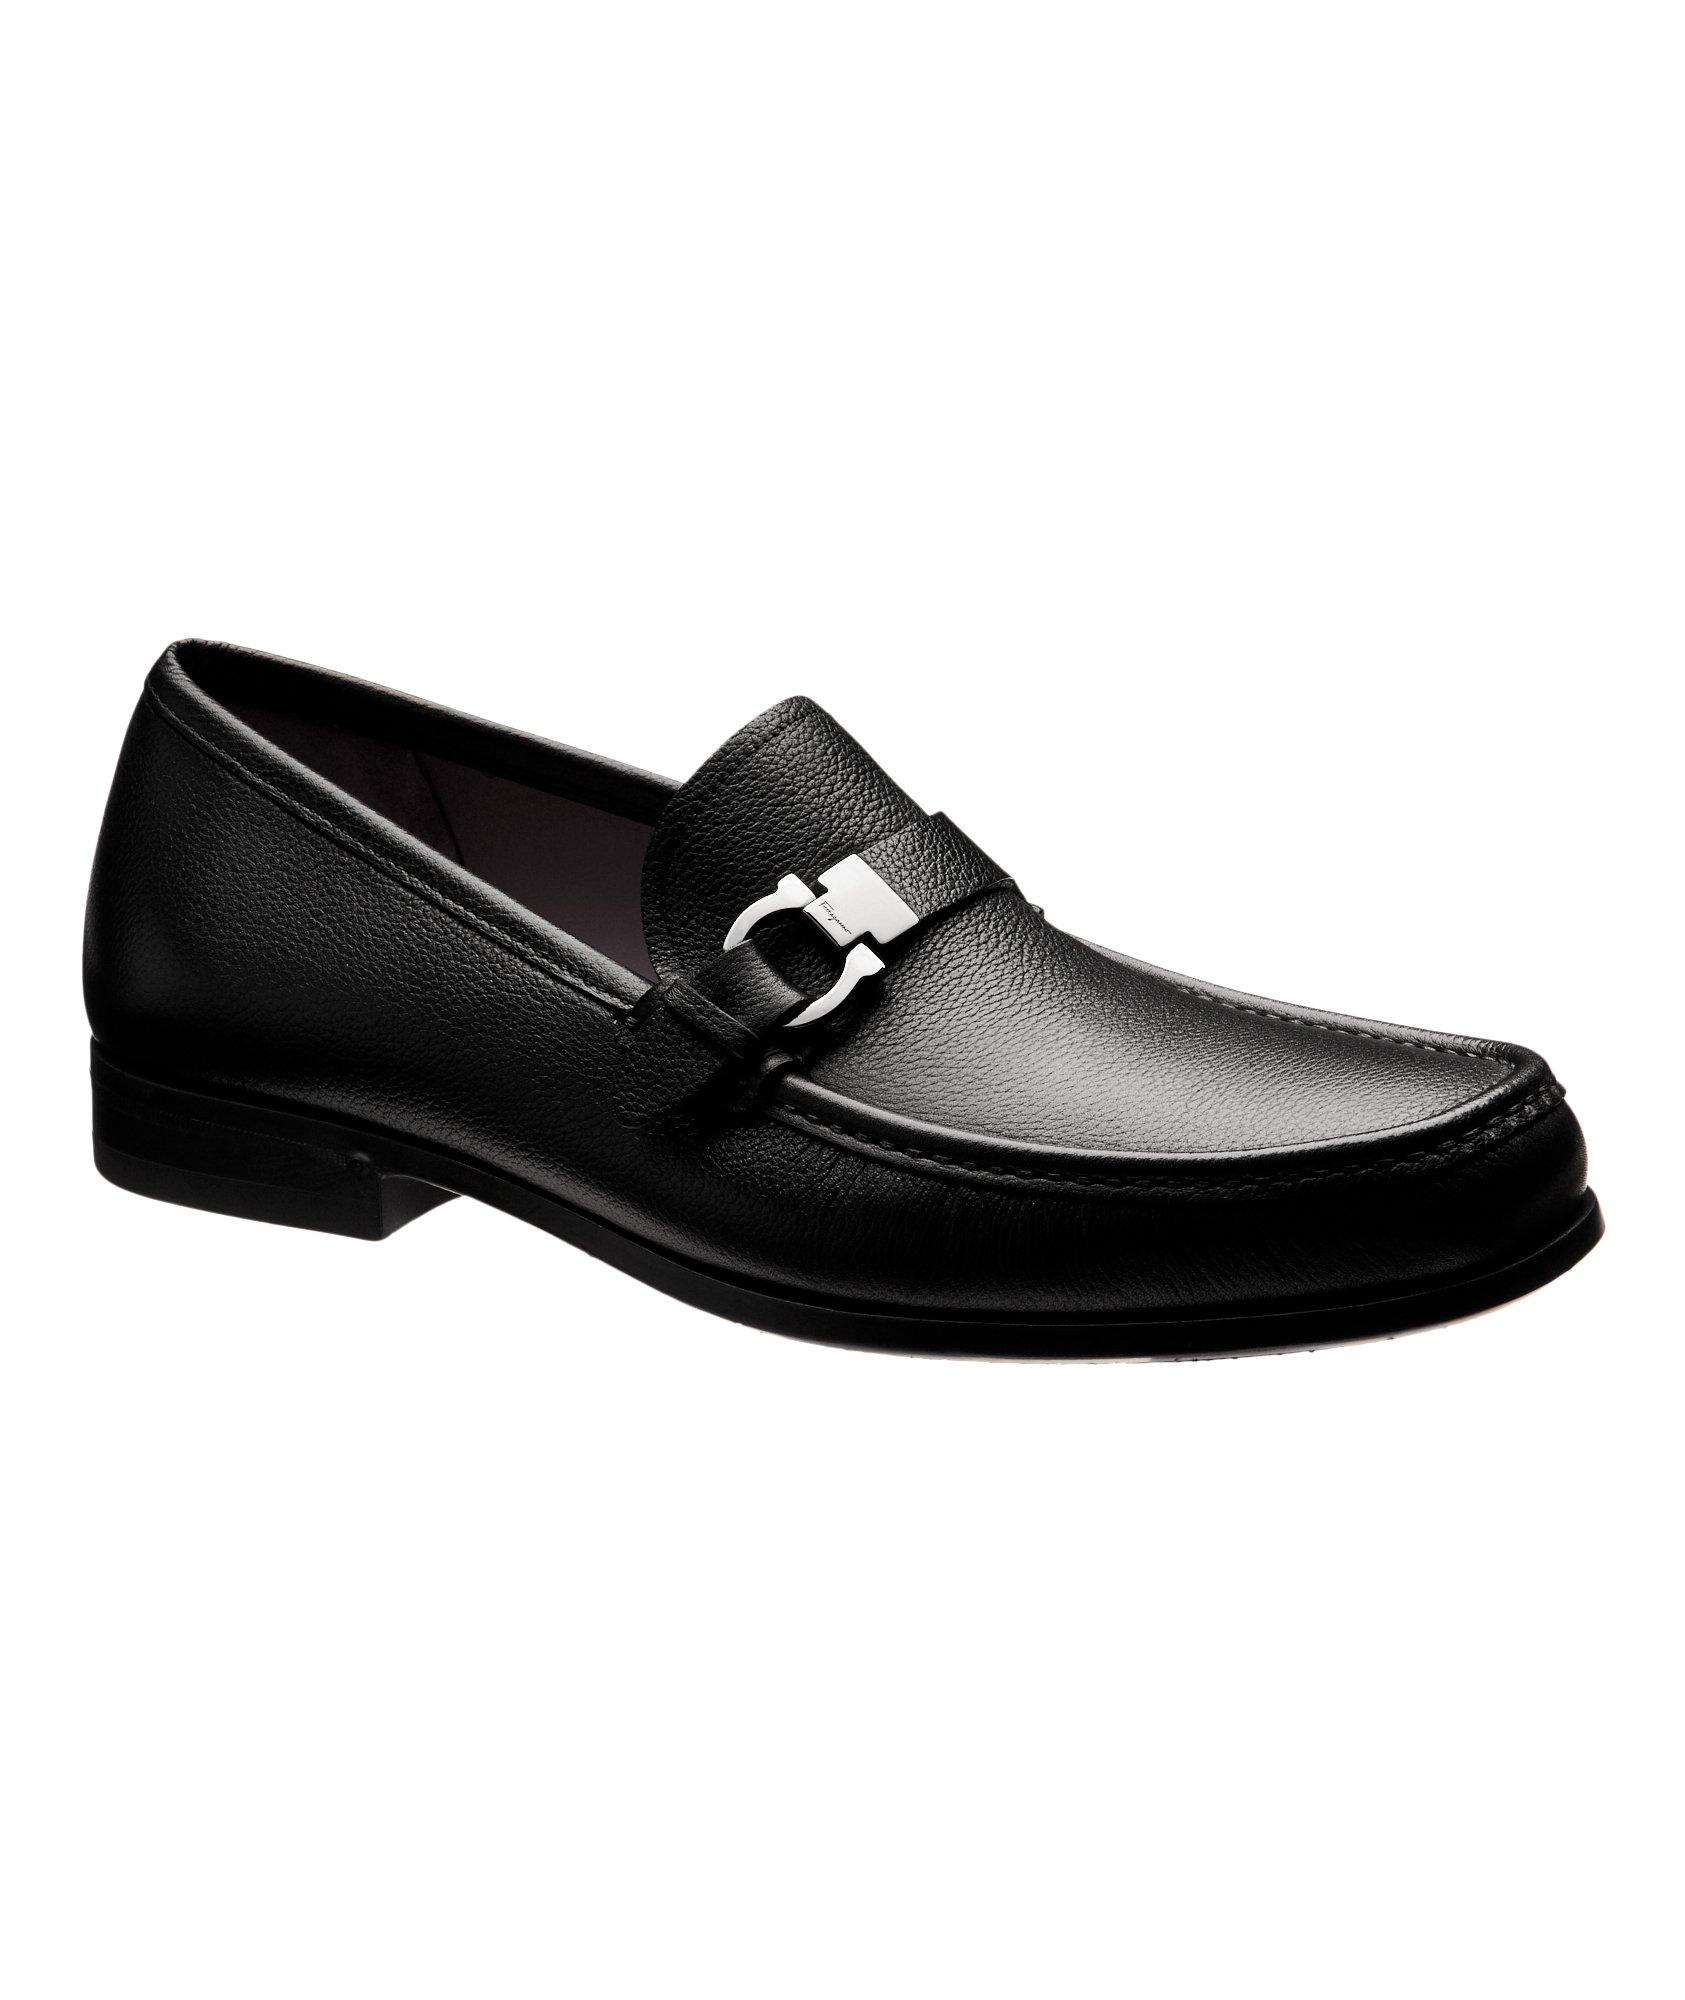 Adam Soft Tumbled Leather Loafers image 0